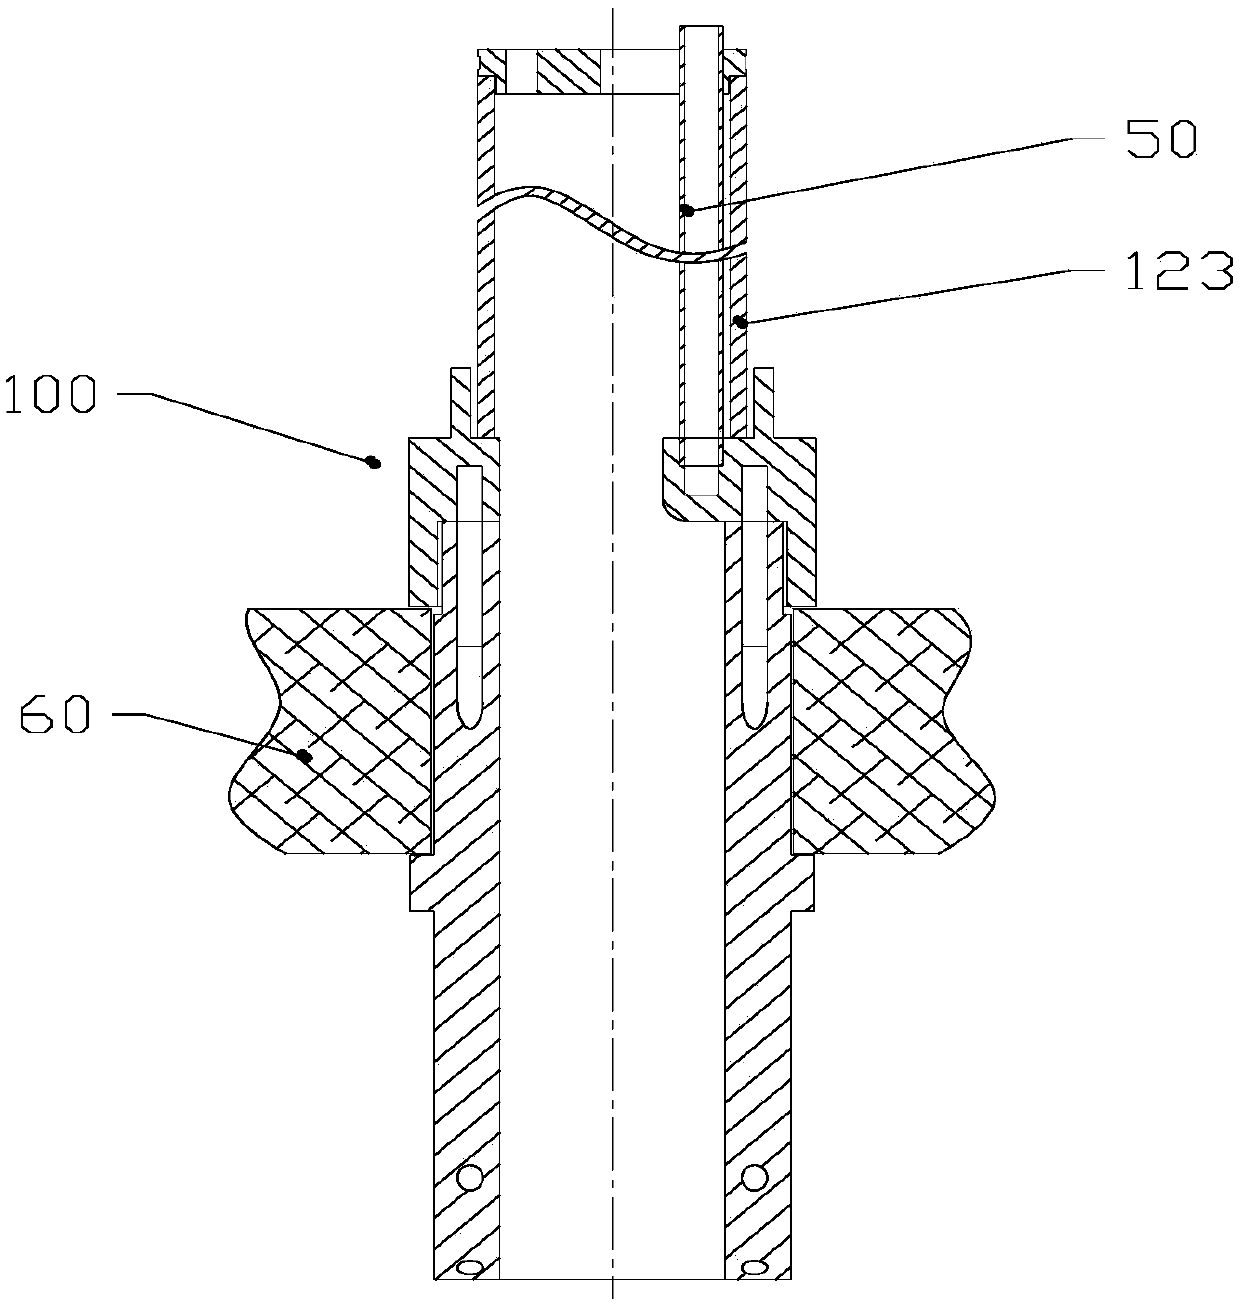 Drainage device capable of changing flow direction of carrier gas